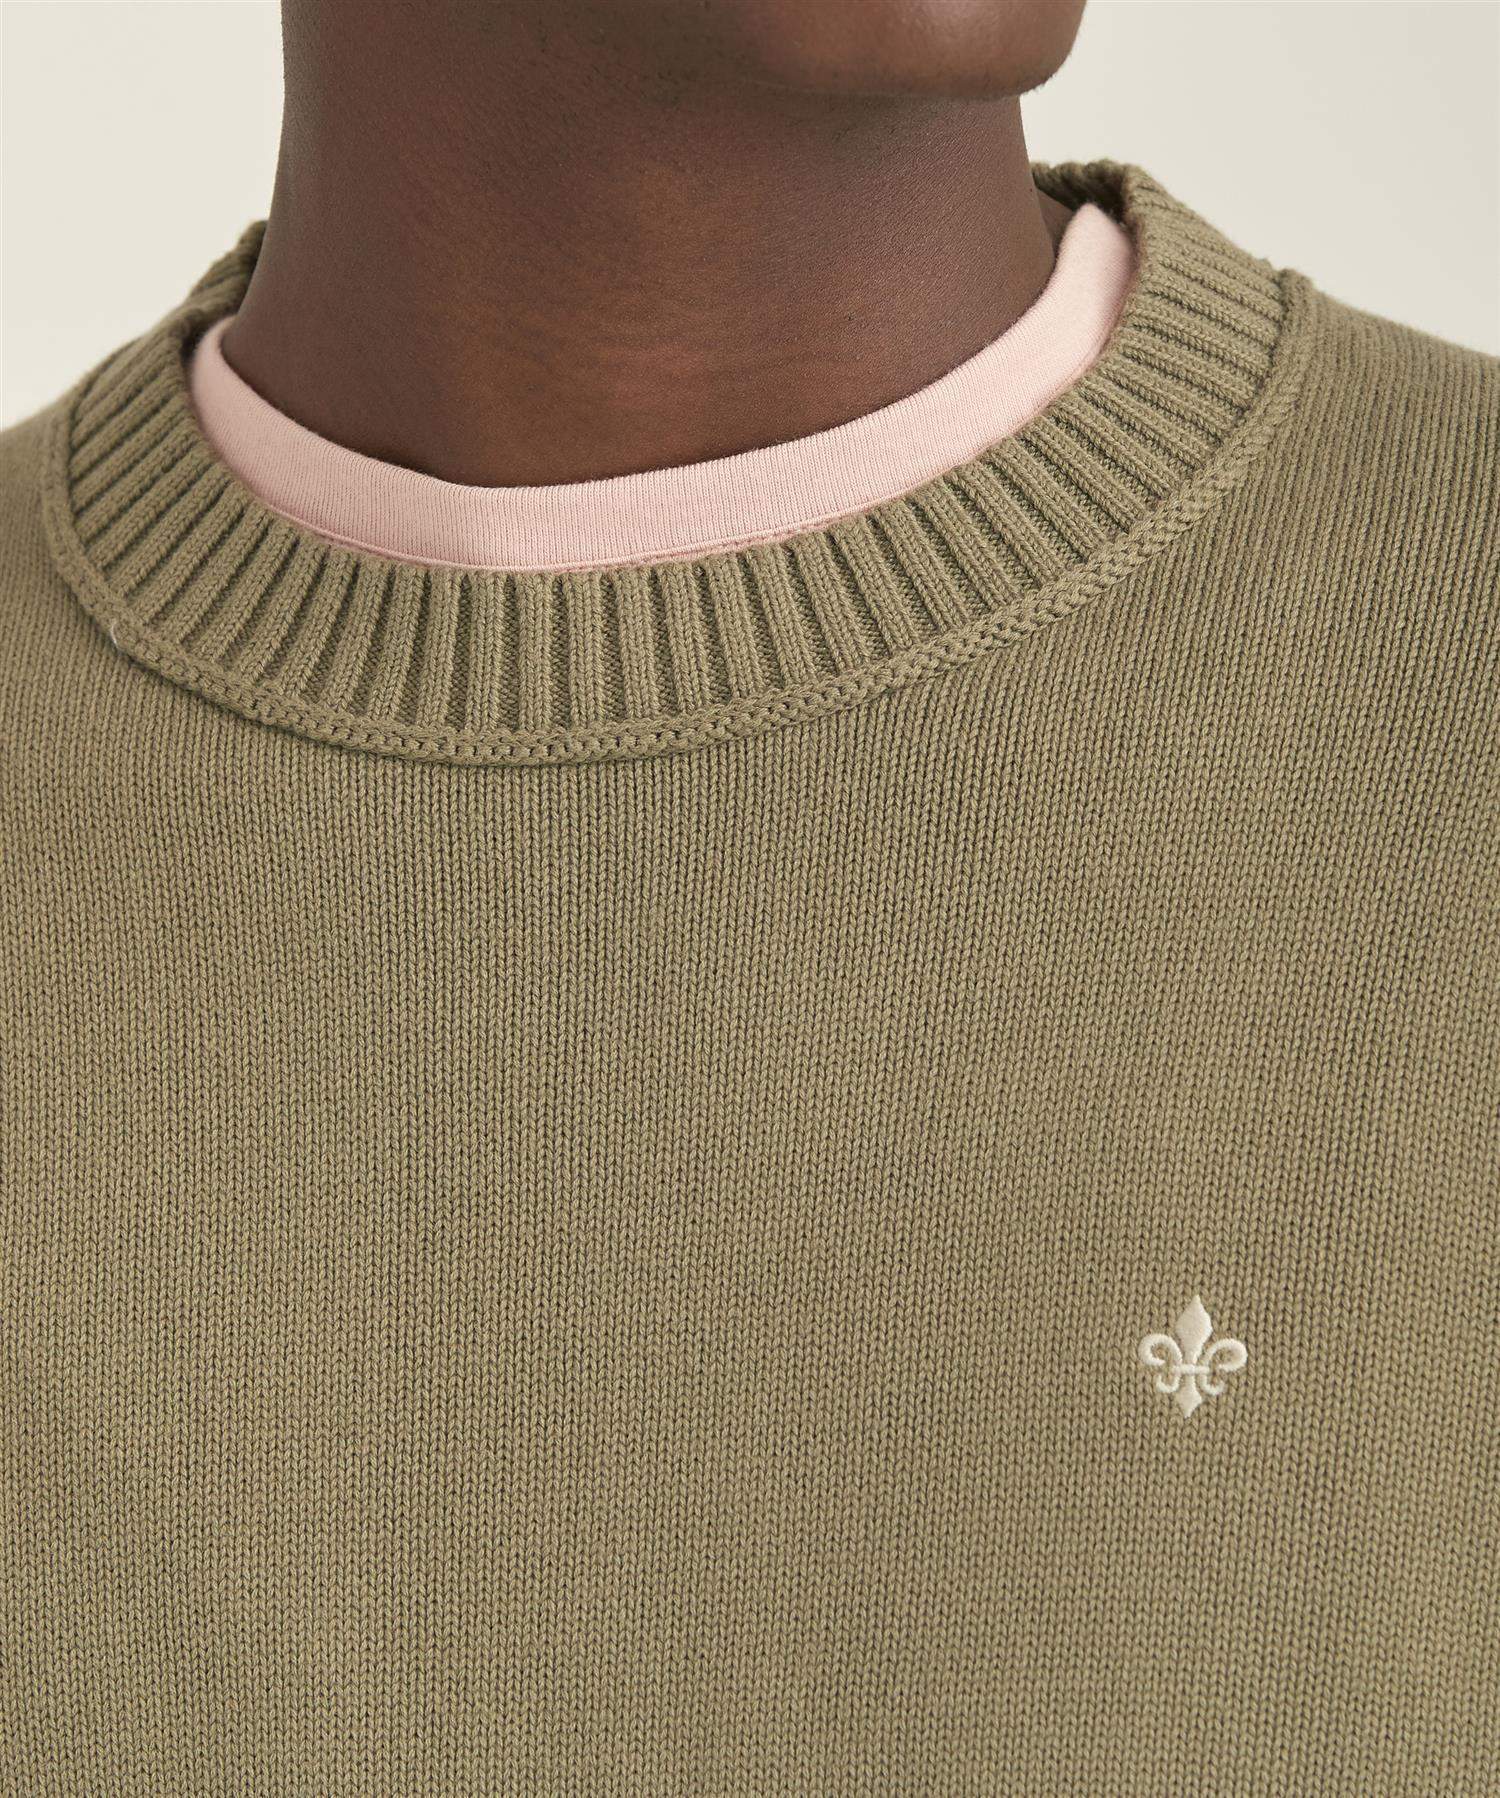 Corby O-neck Oliven-Morris Stockholm-2102,5661181-ProductId,76 Olive-Product.Variant,901107-Product.Number,gensere,Herre,morris-stockholm,Oliven,Rund hals